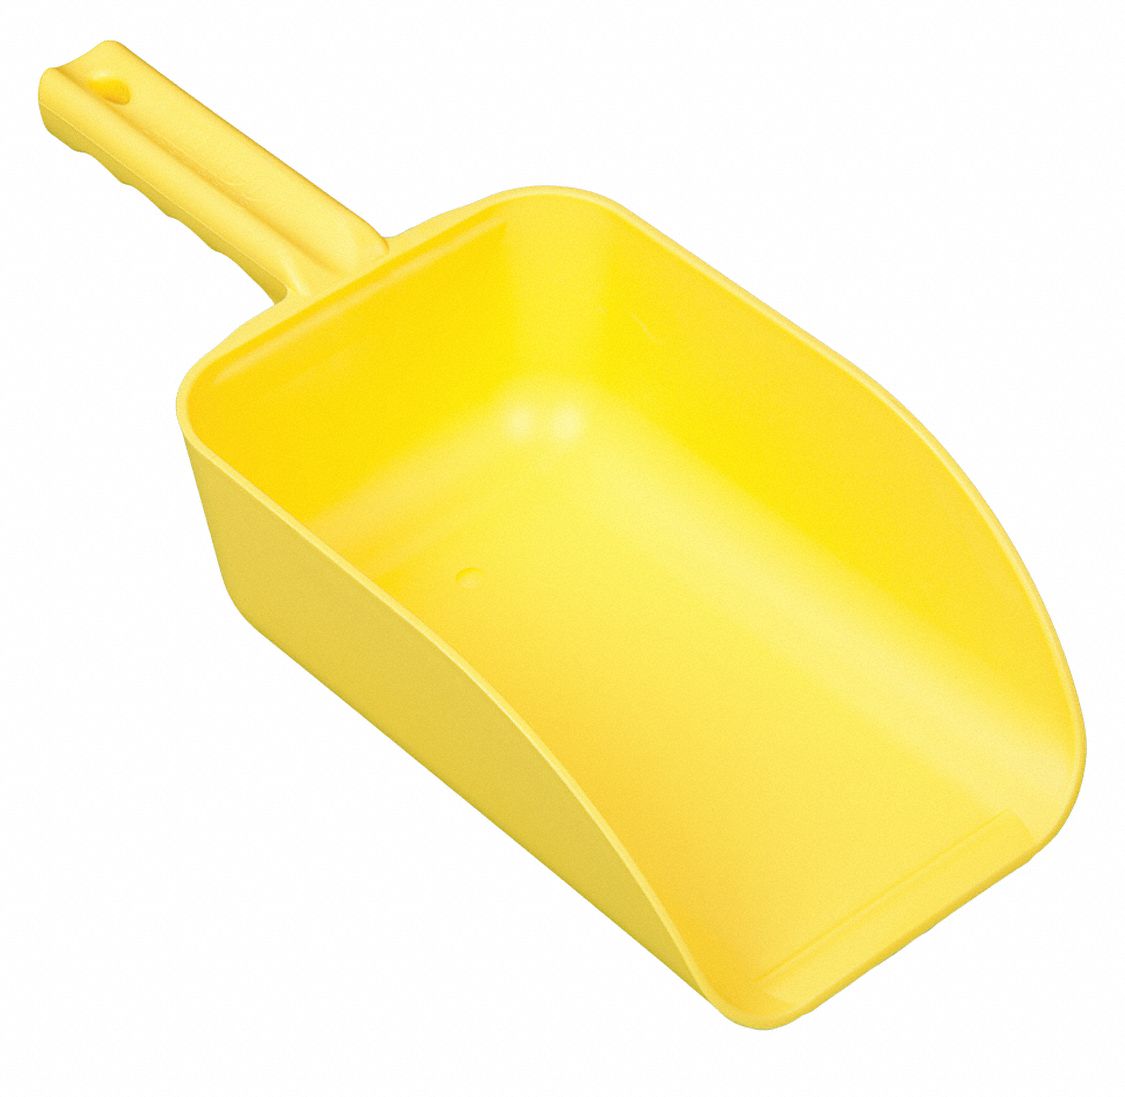 3UE75 - E0612 Large Hand Scoop Yellow 15 x 6-1/2 In